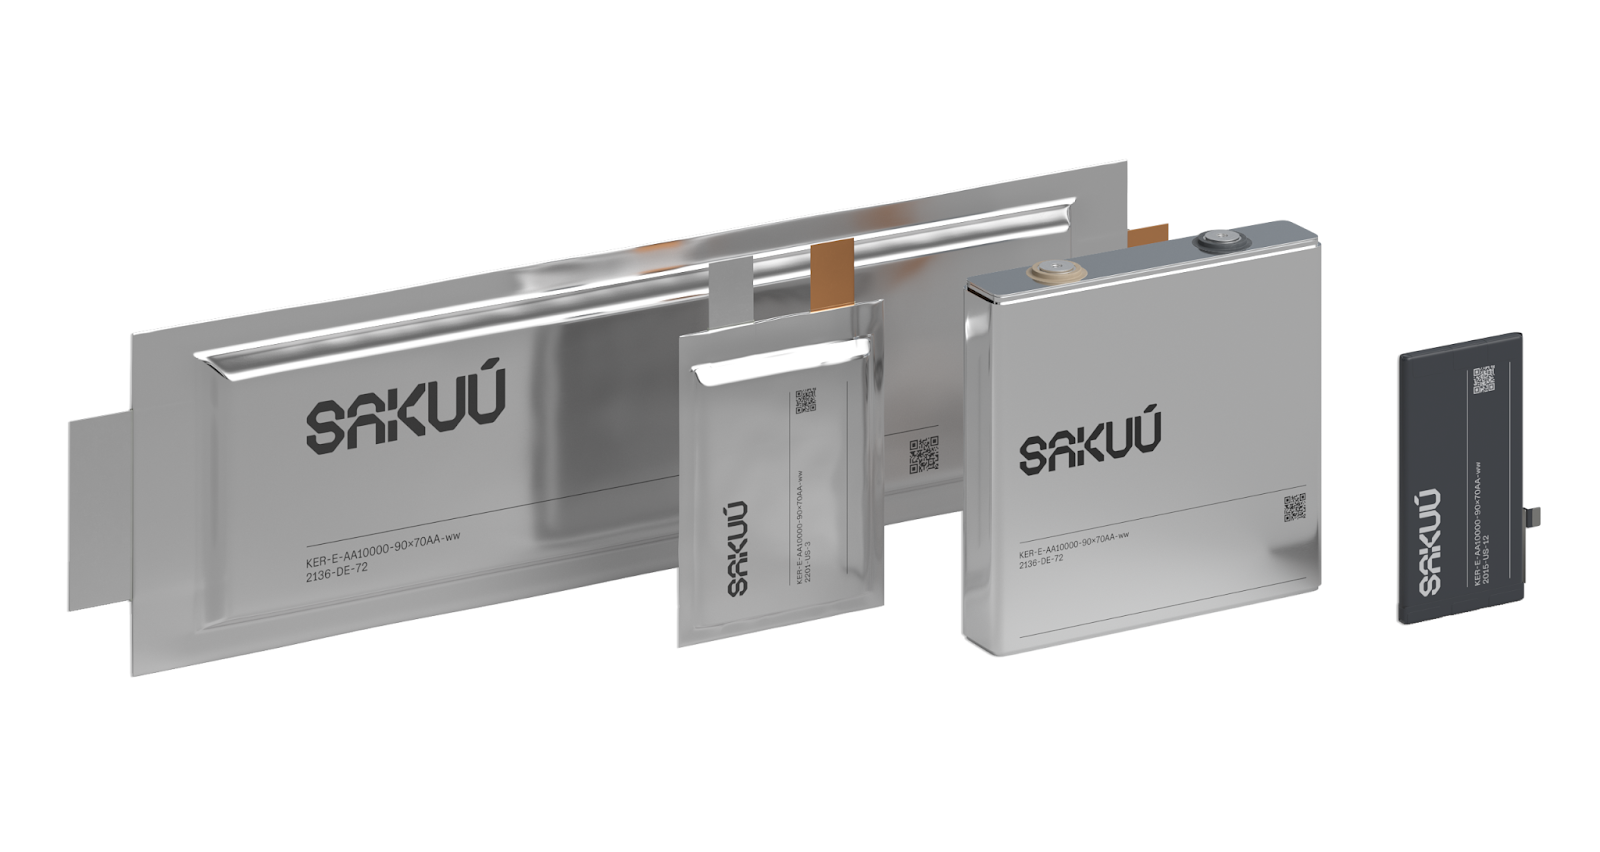 Examples of Sakuu batteries in different sizes